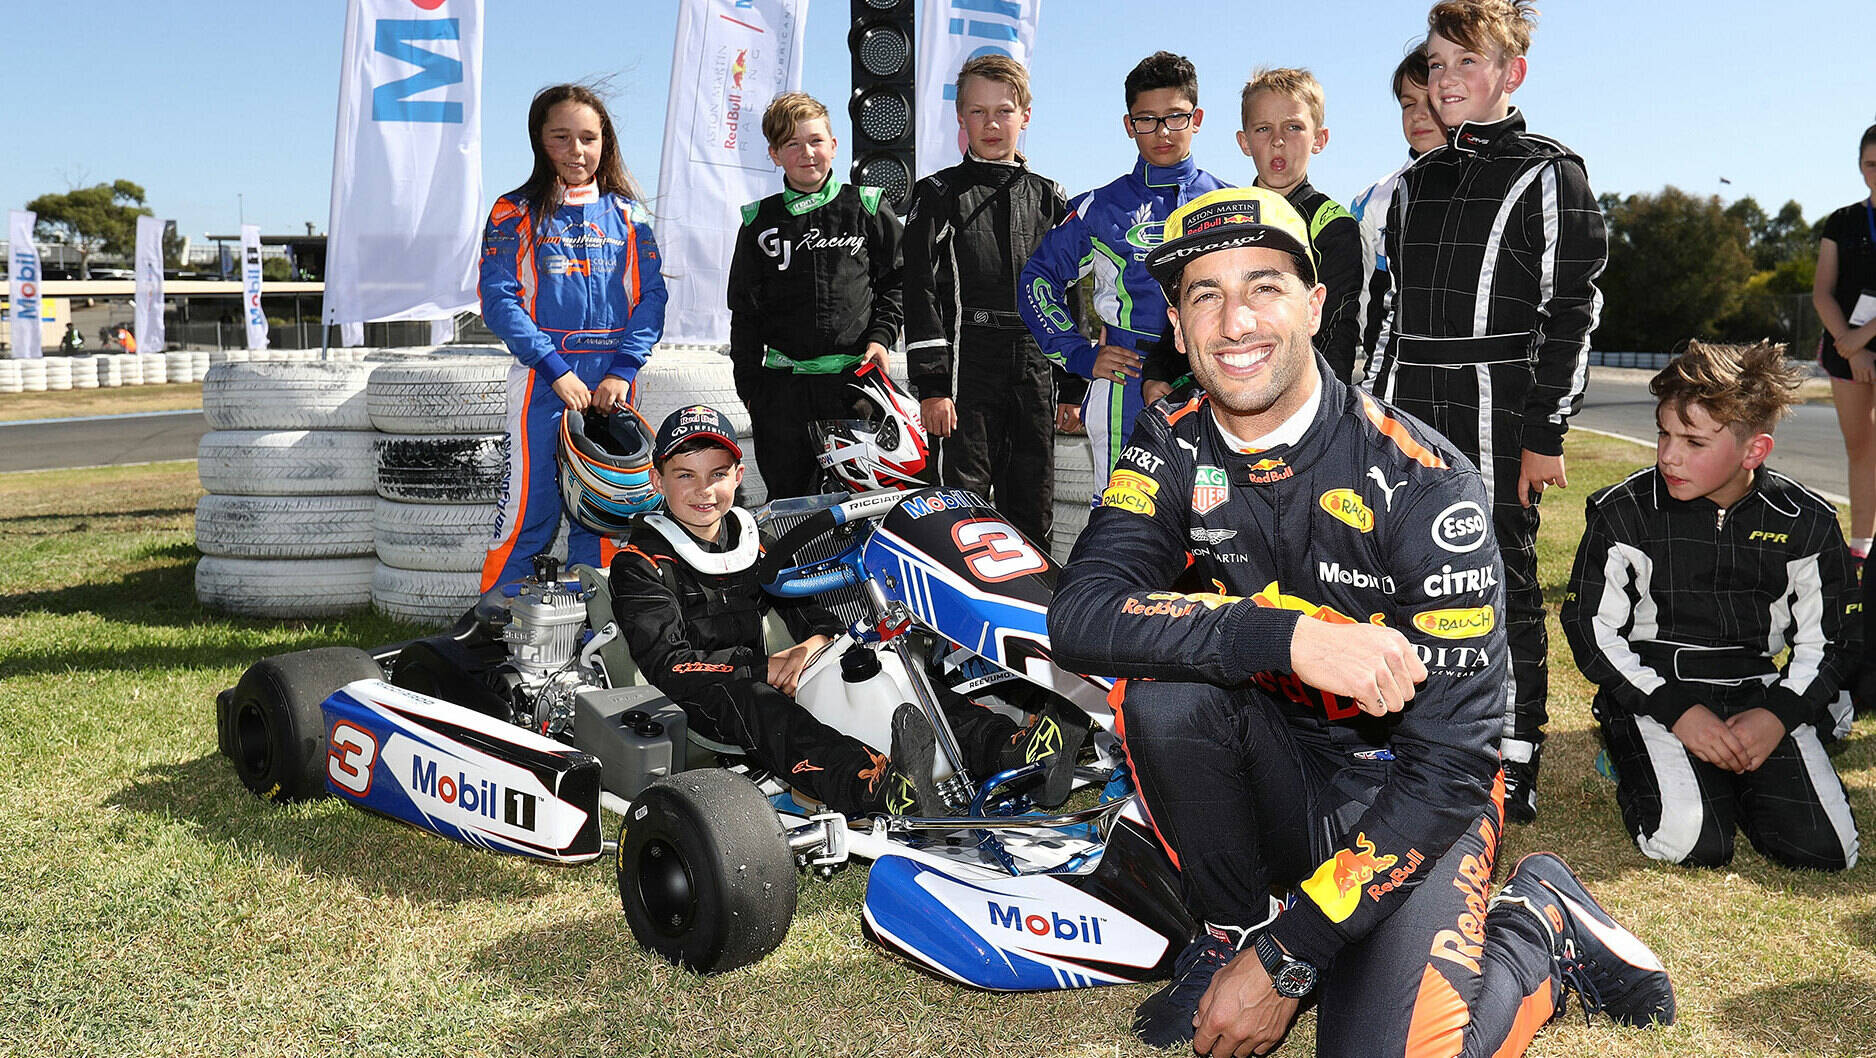 Image Photo— F1 star Daniel Ricciardo recently joined young racers at Port Melbourne to share his experiences behind the wheel.